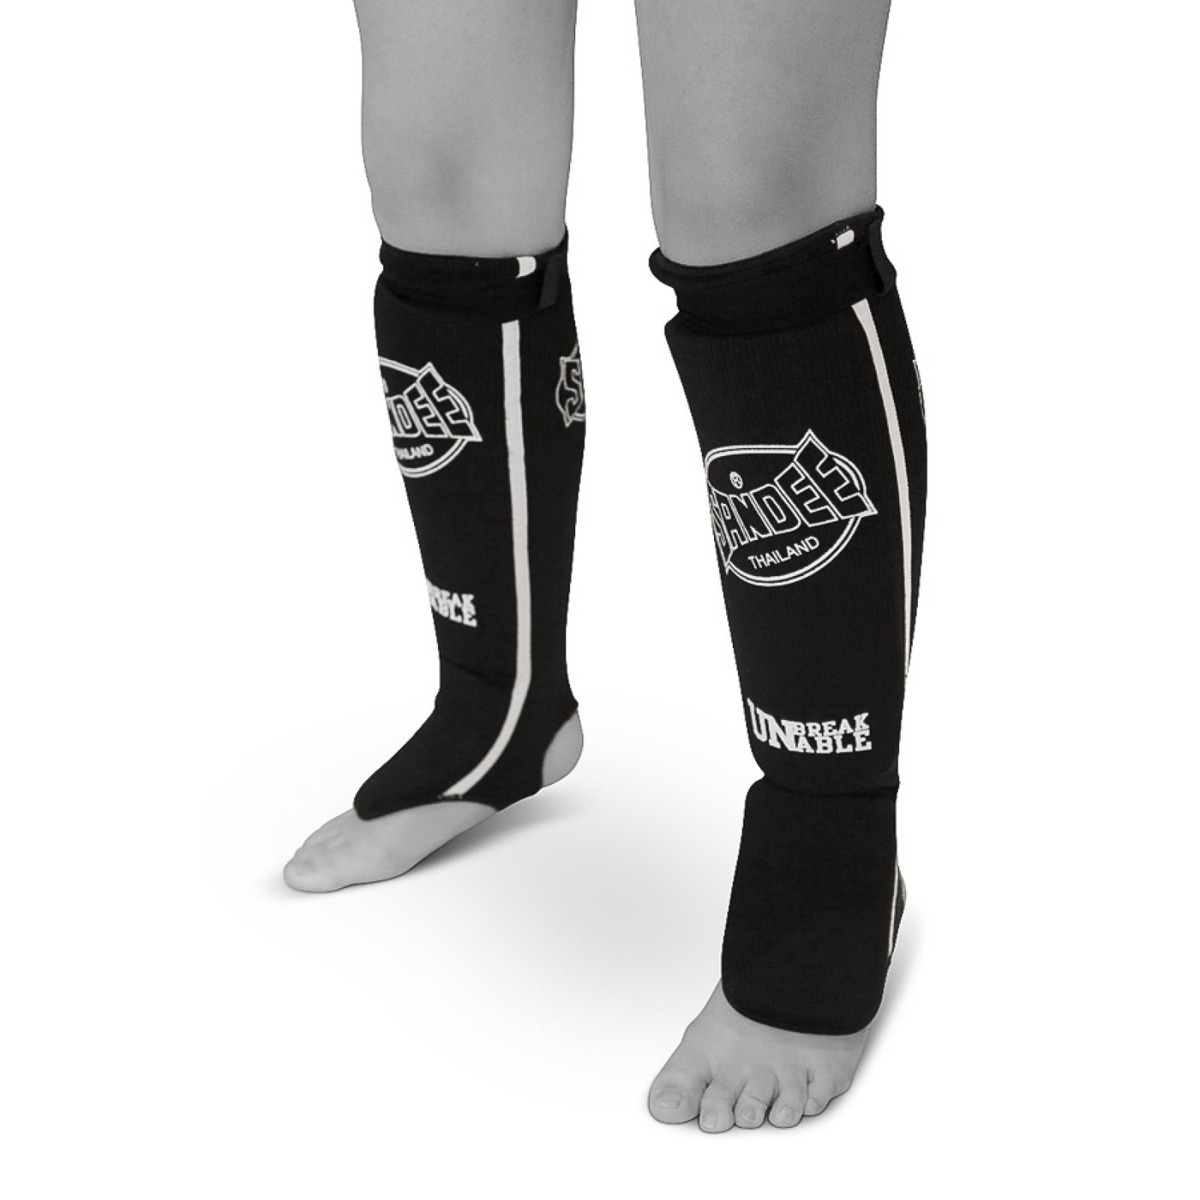 Sandee Competition Muay Thai Cotton Shin Pads - Black - Click Image to Close